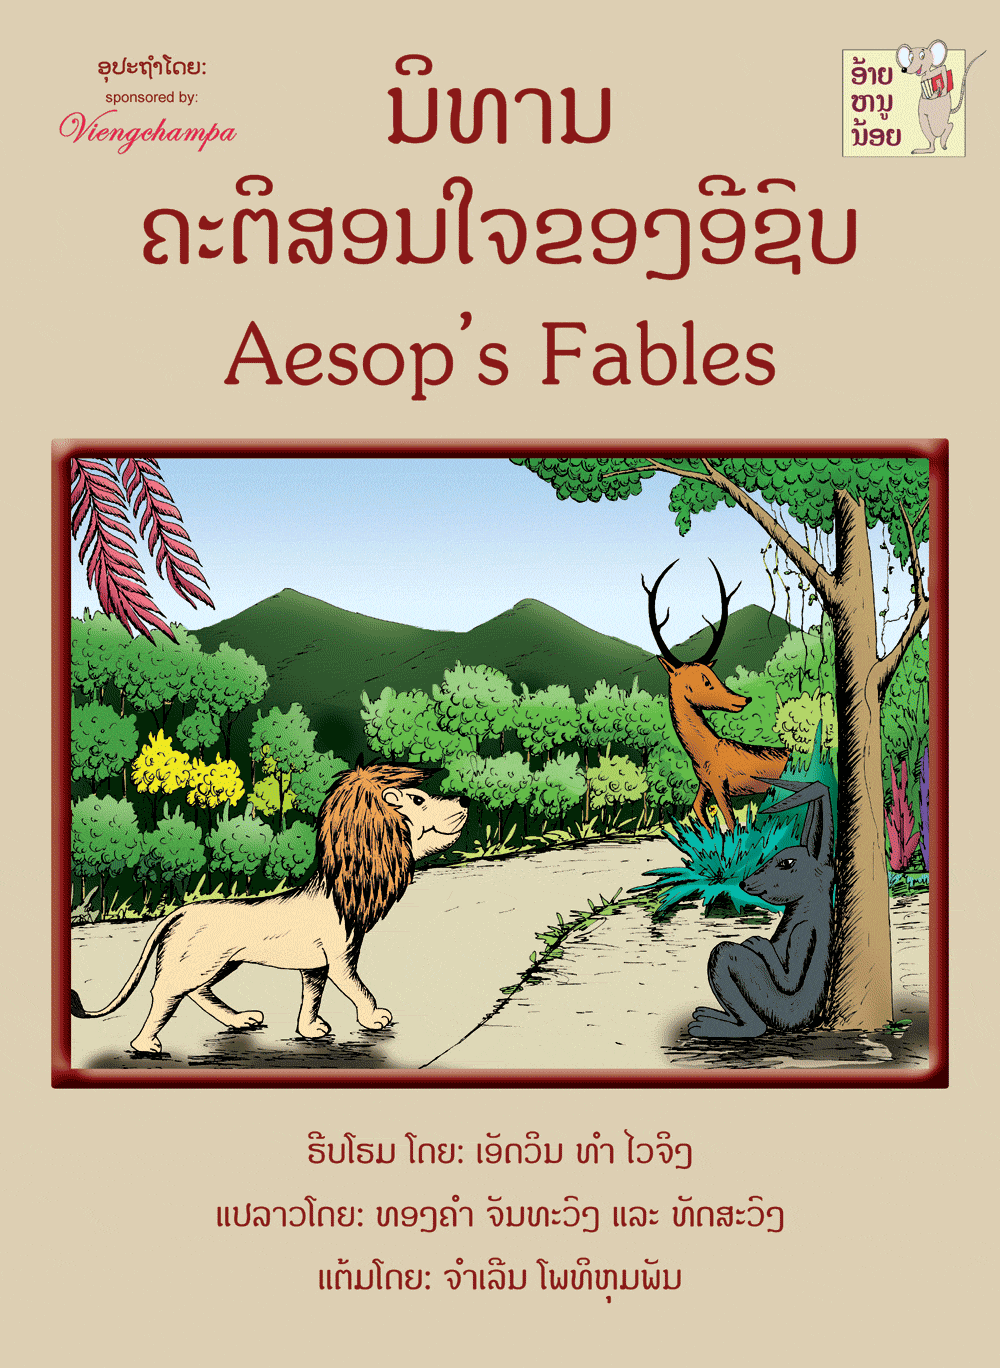 Aesop's Fables large book cover, published in Lao and English